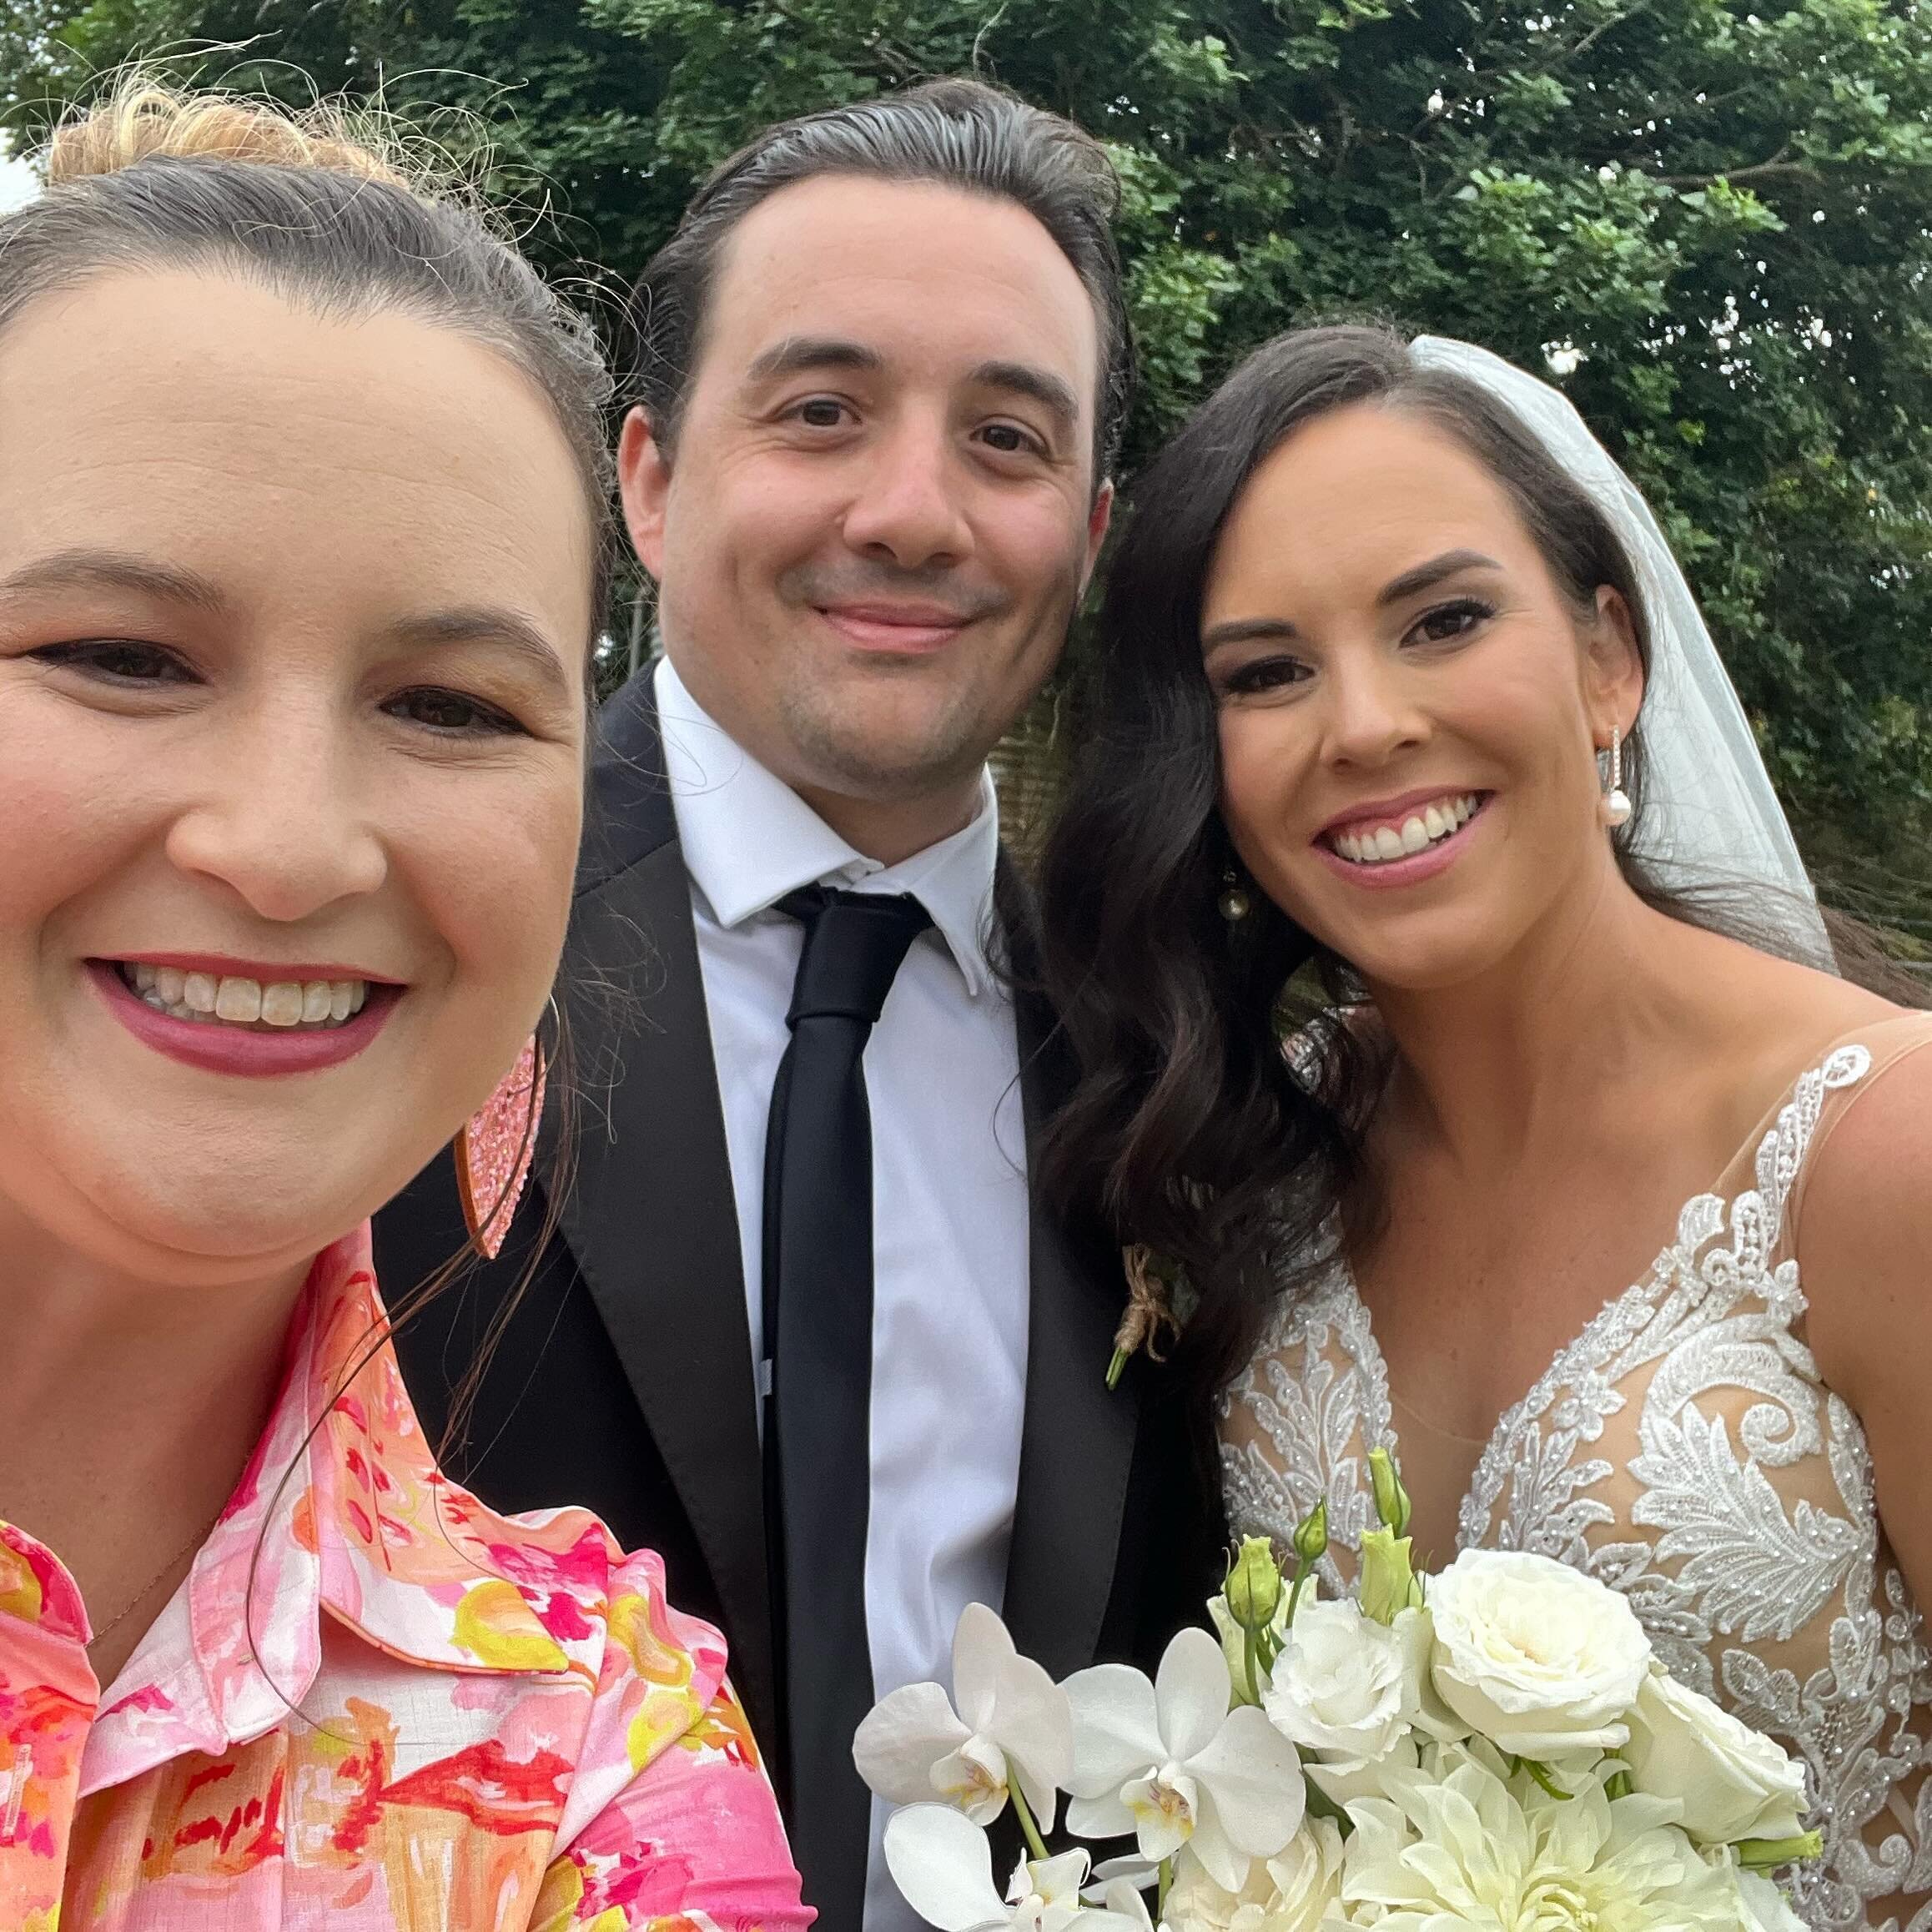 💘DANIELLE &amp; JARRED 🎊

Finally after 12 years together, they are hitched! Married on Jarred&rsquo;s Mum&rsquo;s farm under a slightly wet sky, surrounded by their nearest and dearest, we laughed our way through the telling of their love story. 
